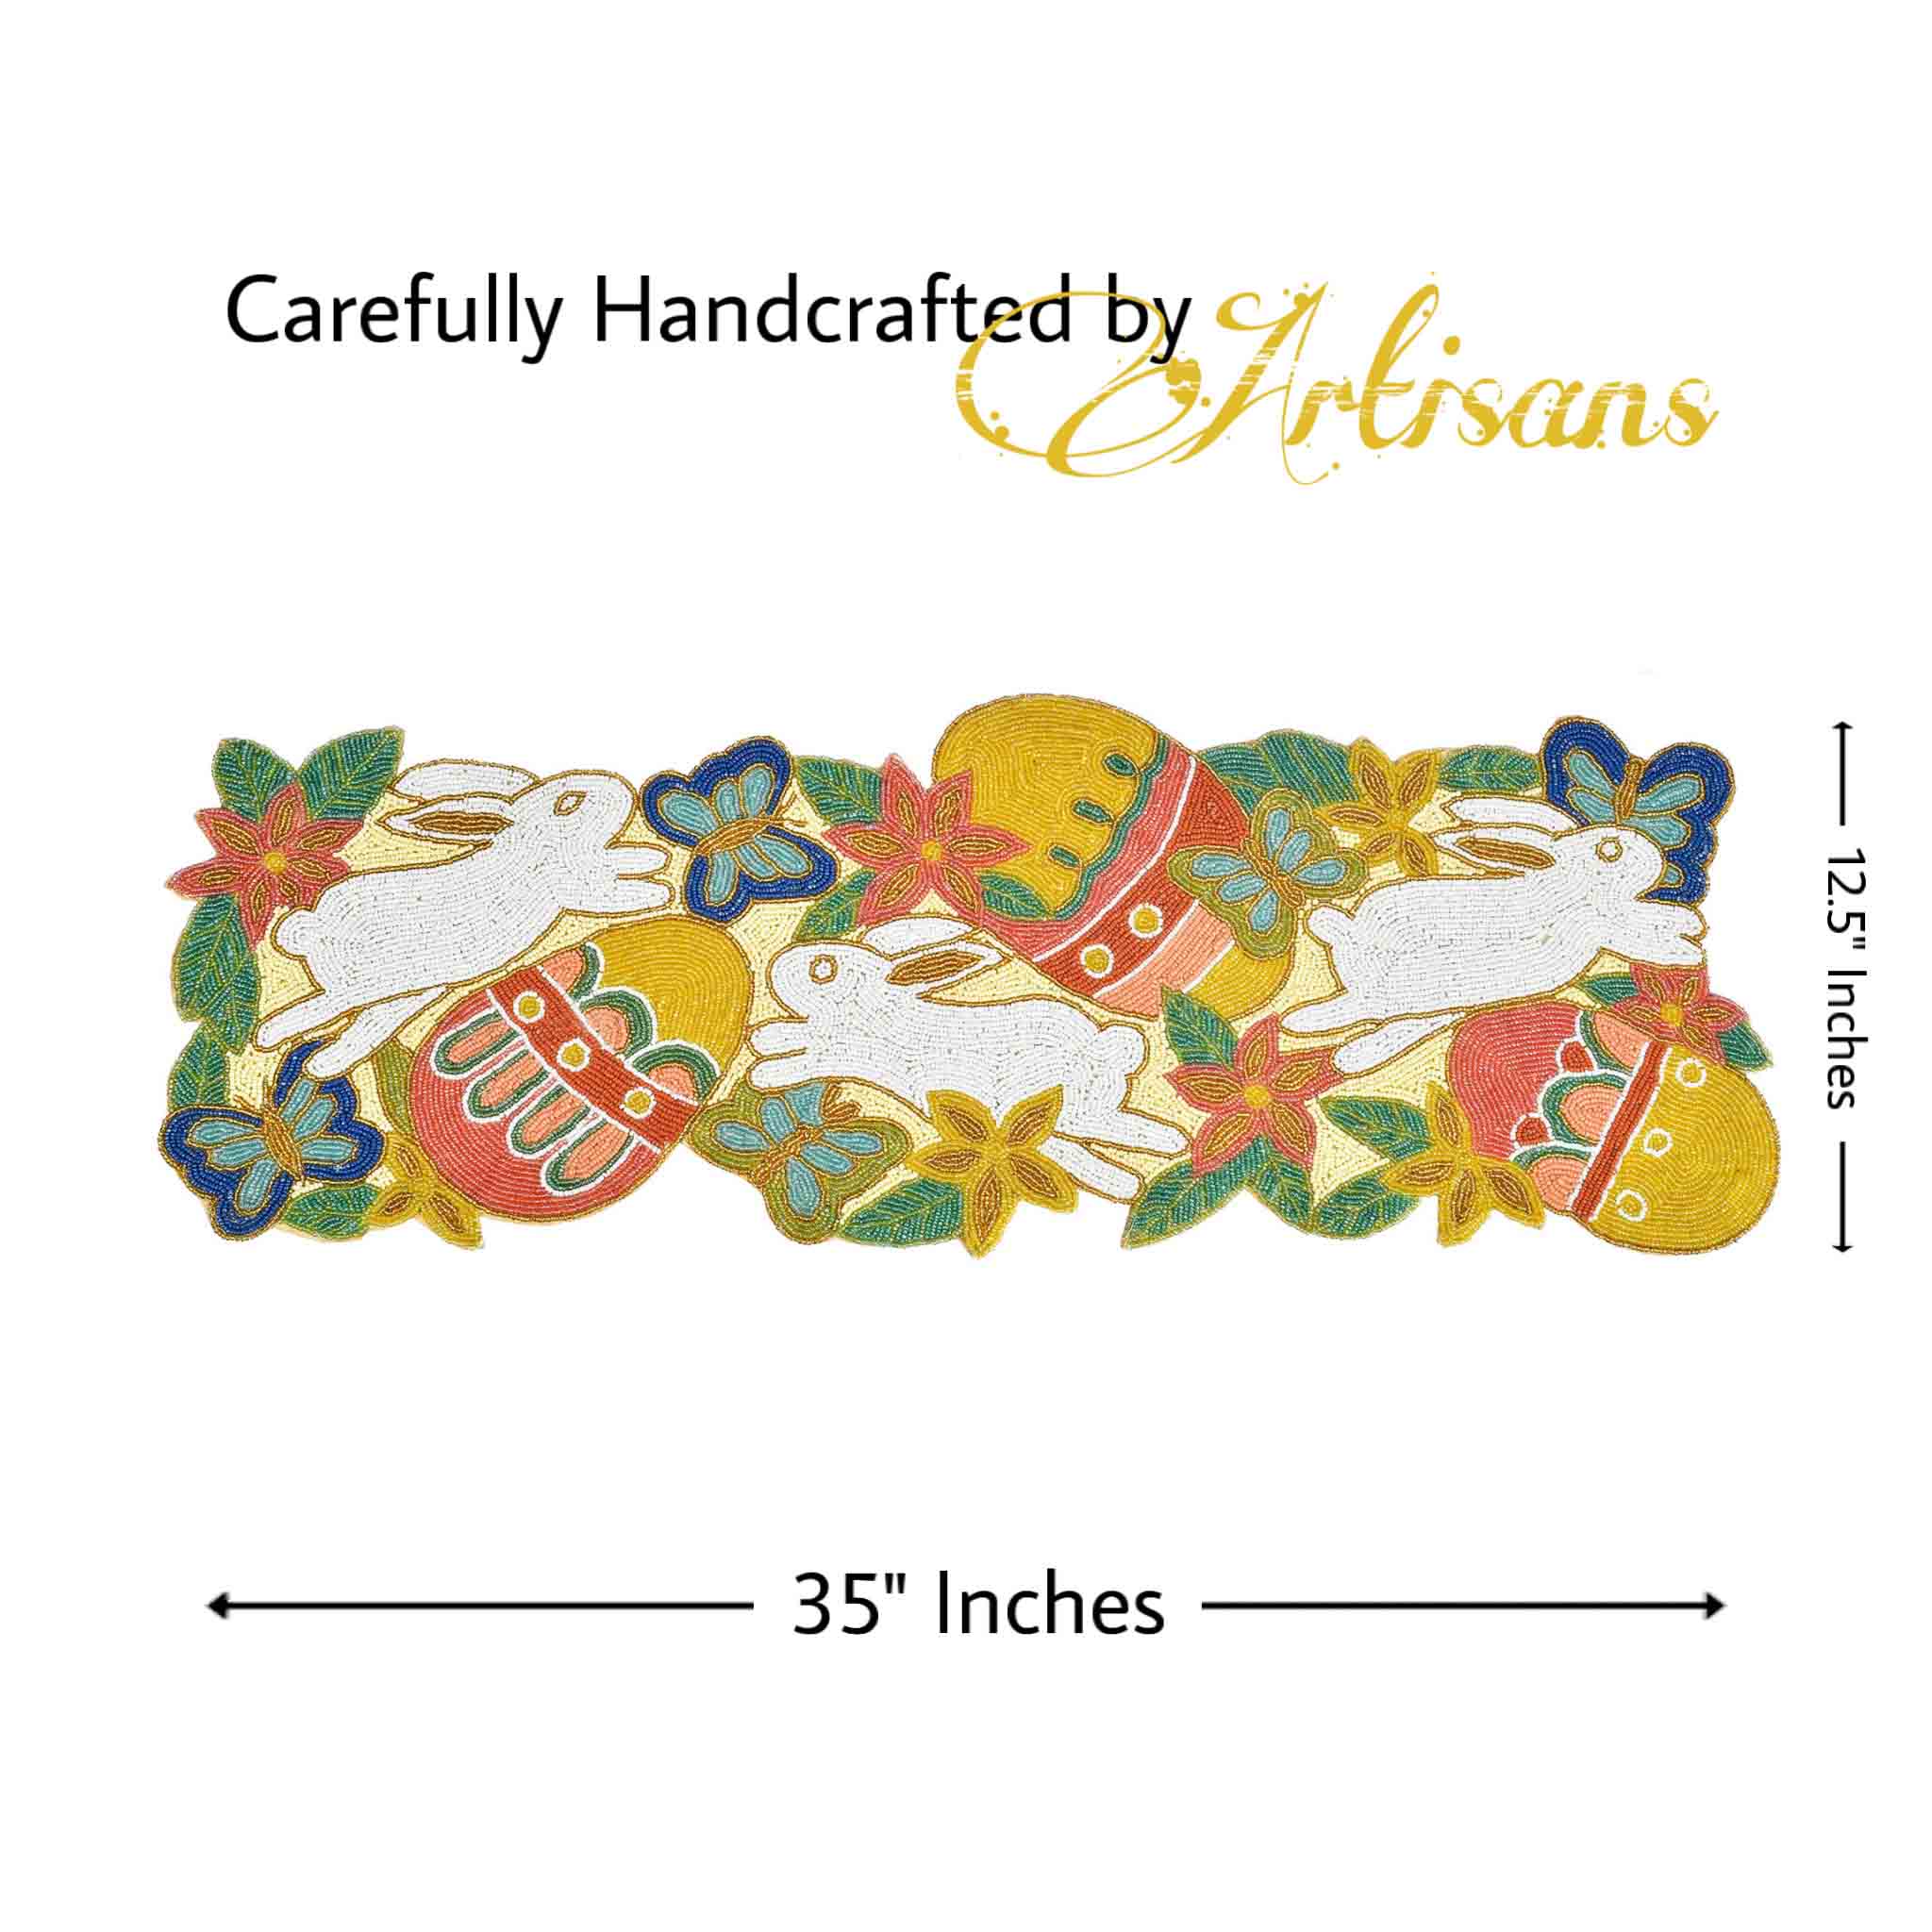 Rascally Rabbits Embroidered Table Runner in Multi